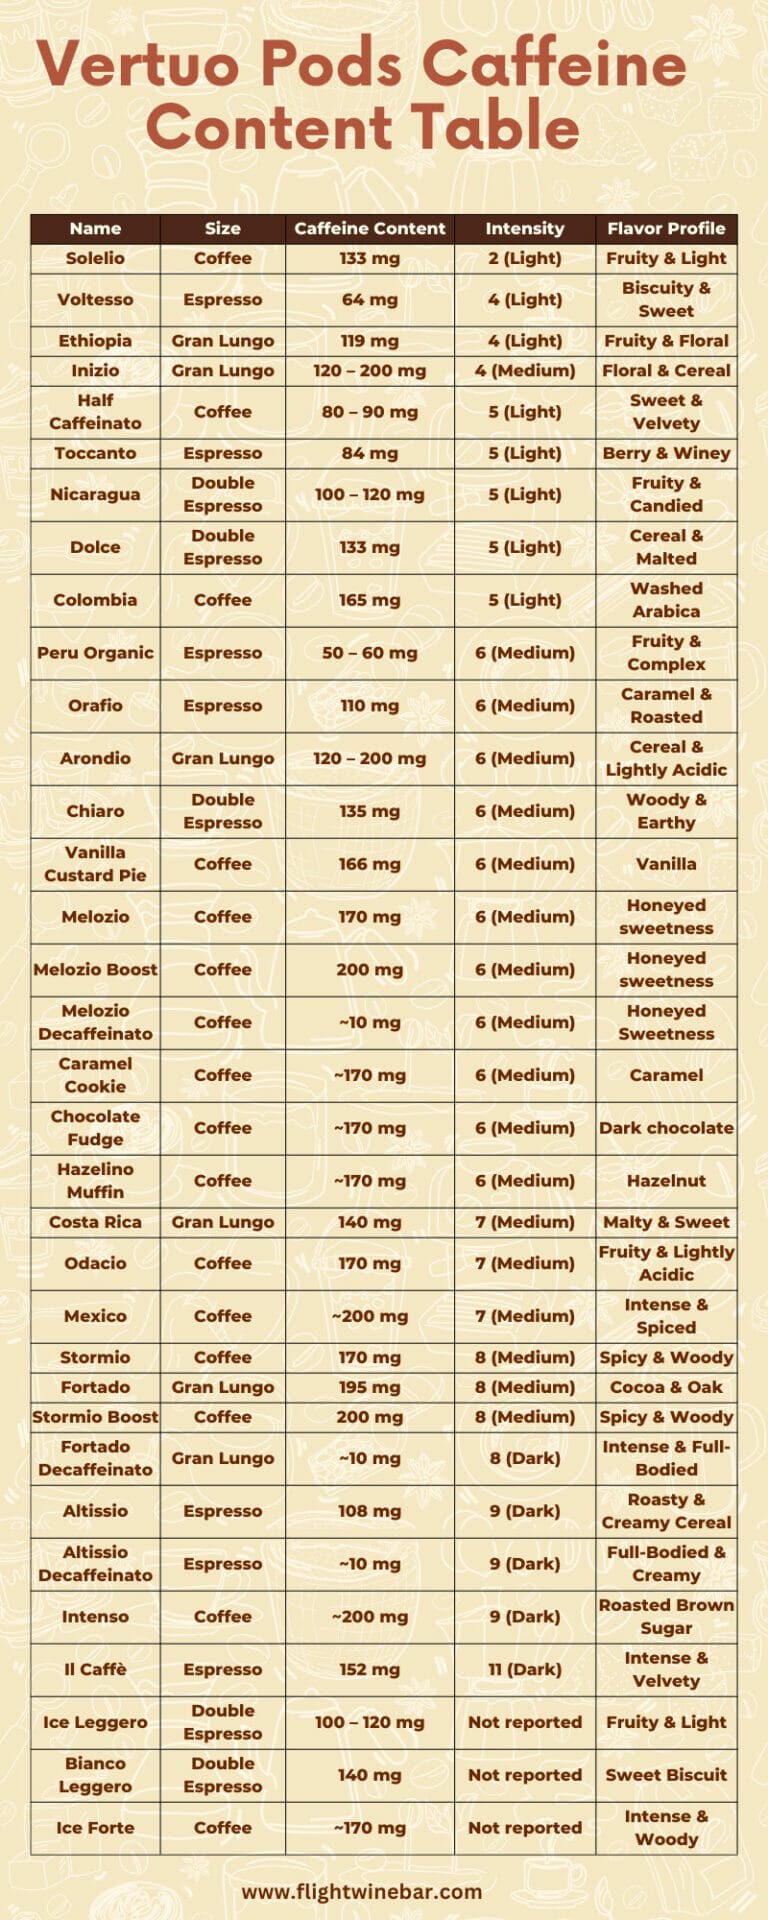 Vertuo Pods Caffeine Content Table